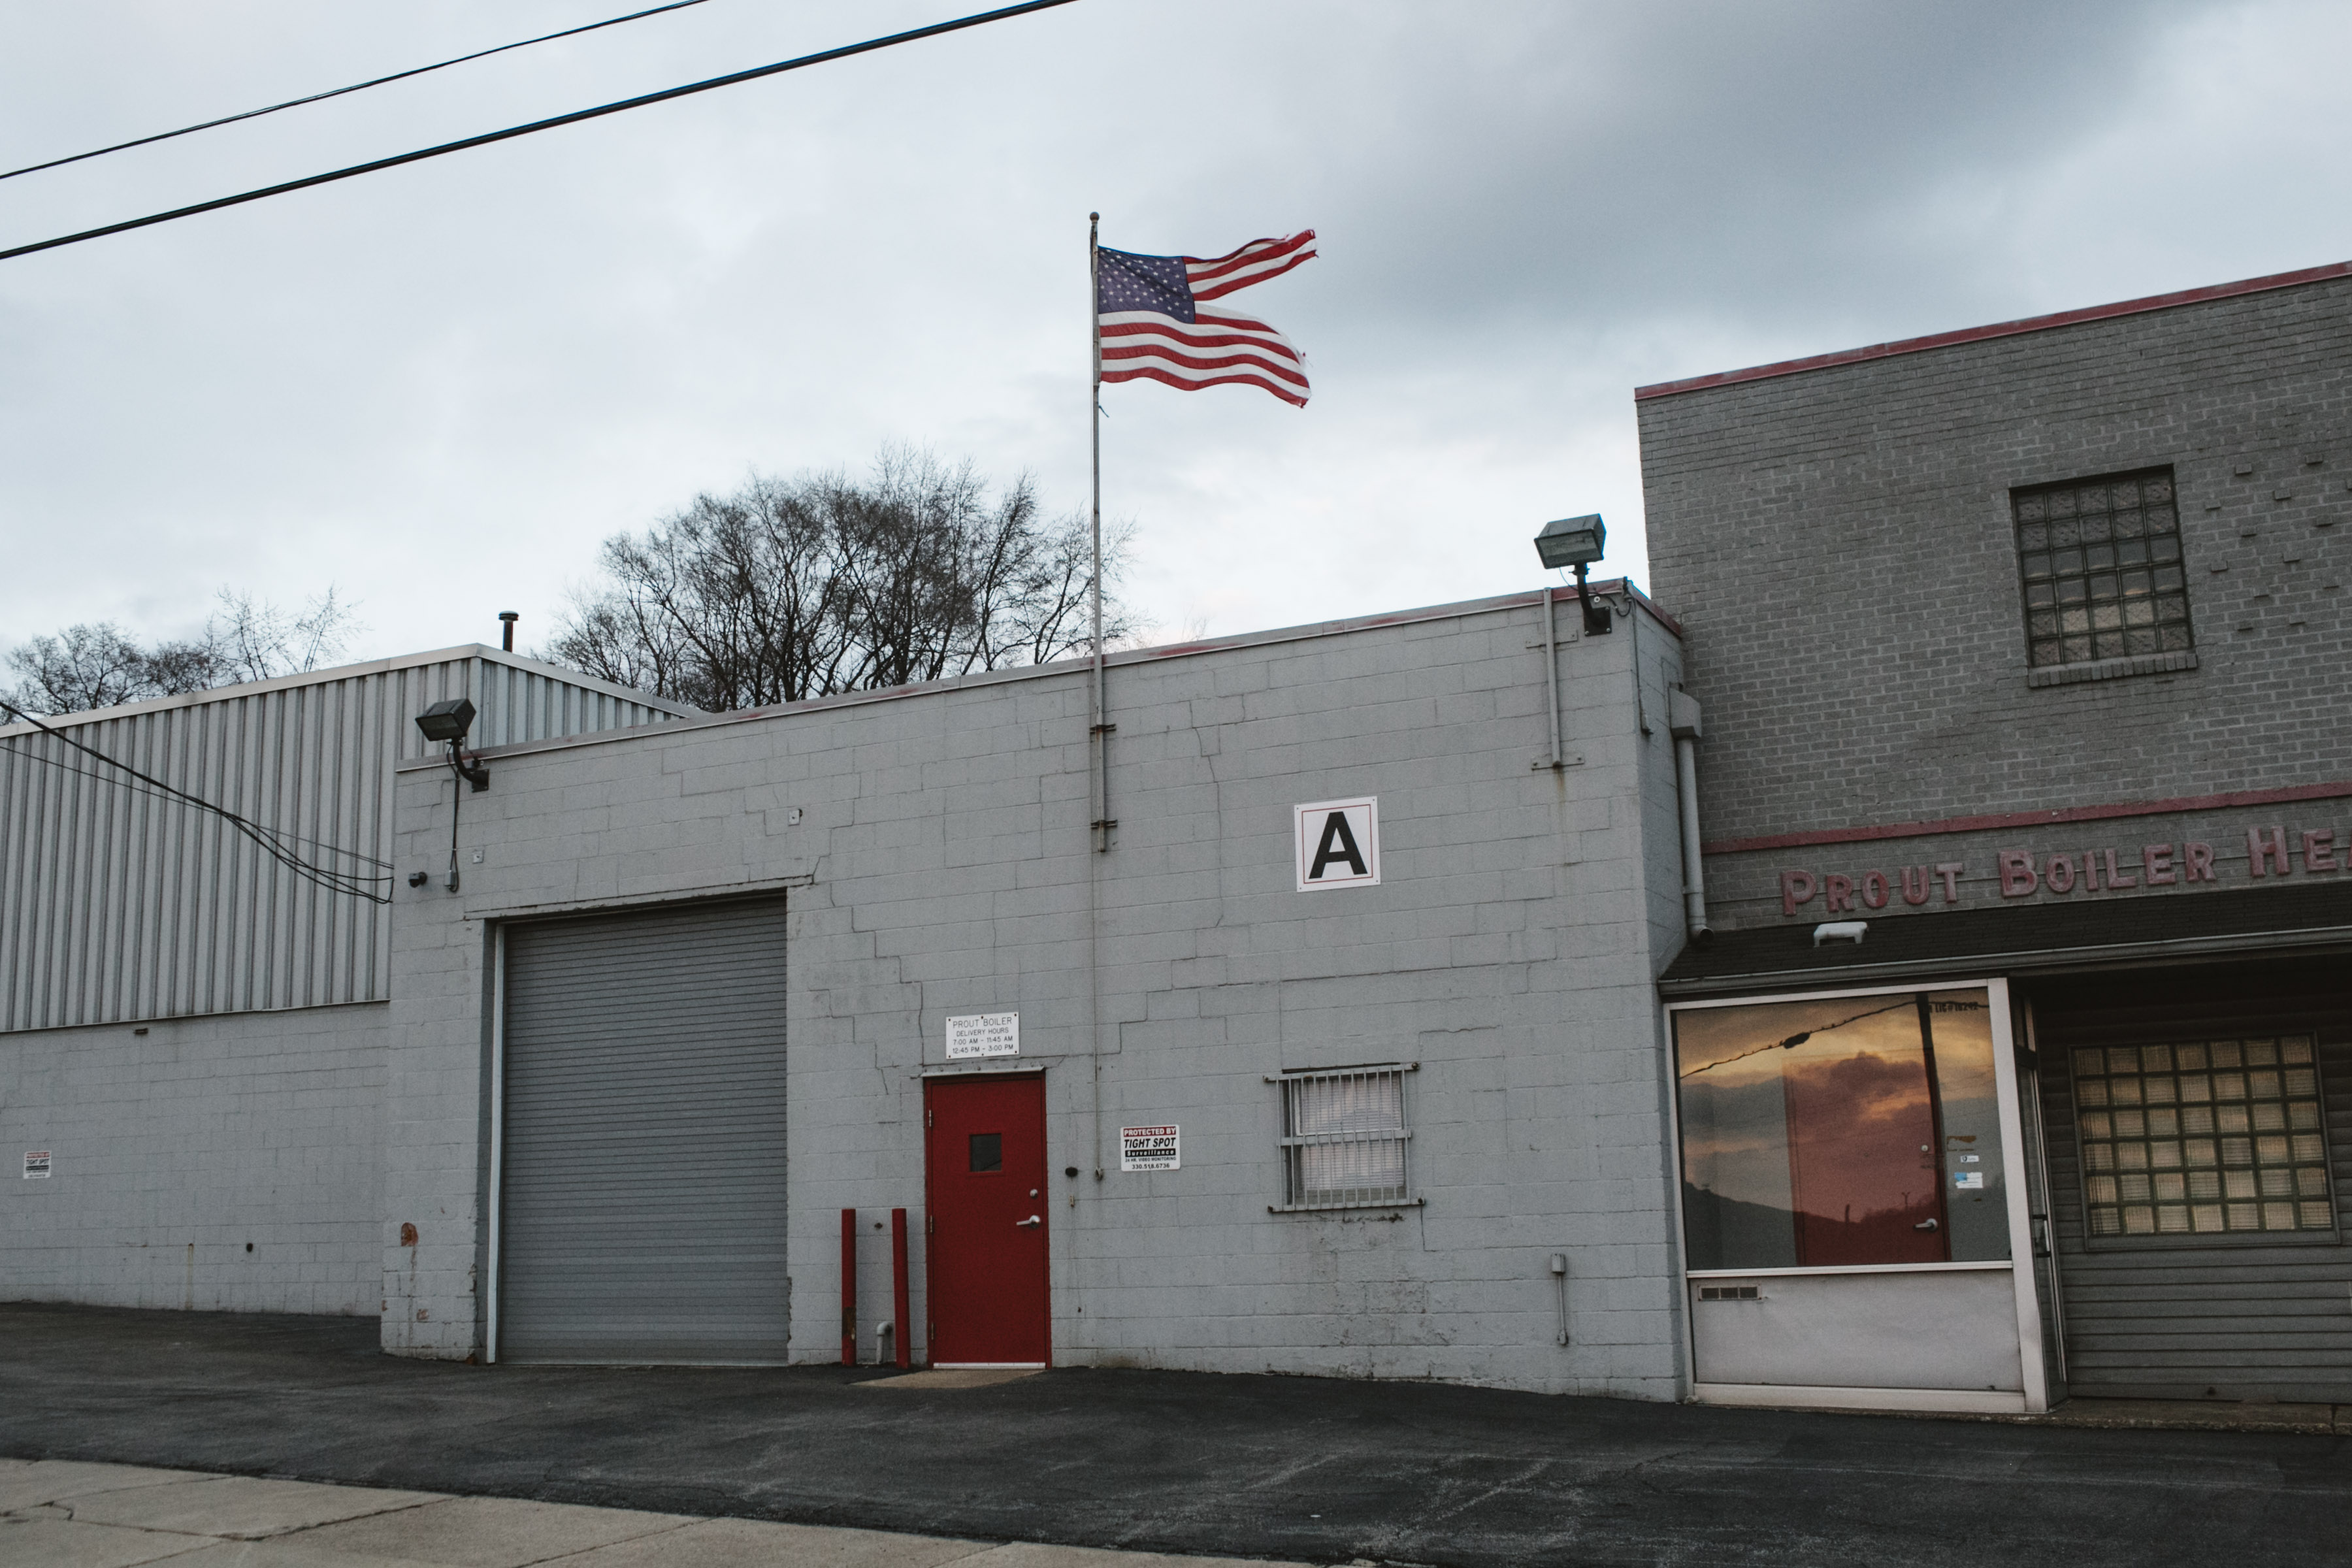 A tattered American flag flies over a heating business in Youngstown, Ohio on March 2, 2017. (Andrew Spear—The Washington Post/Getty Images)